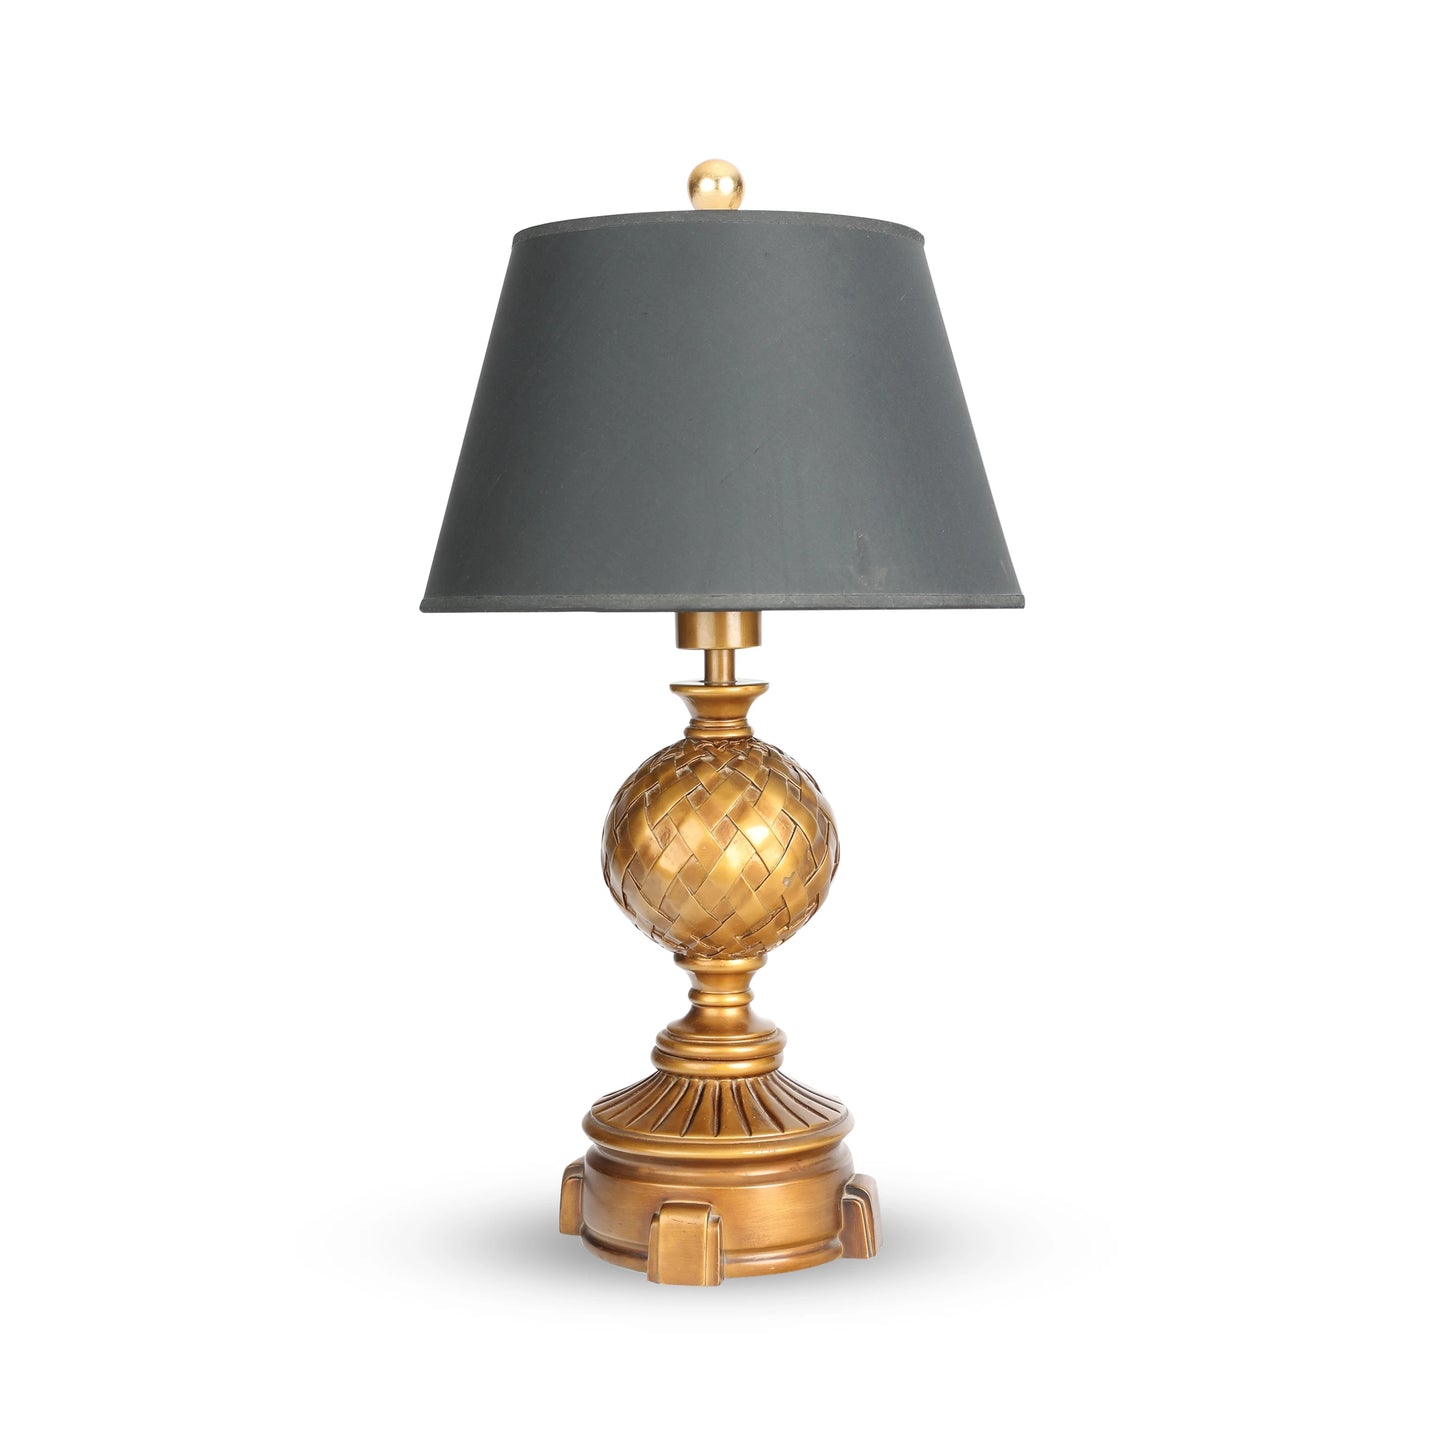 Handmade Brass Metal Table Lamp With Grey lampshade